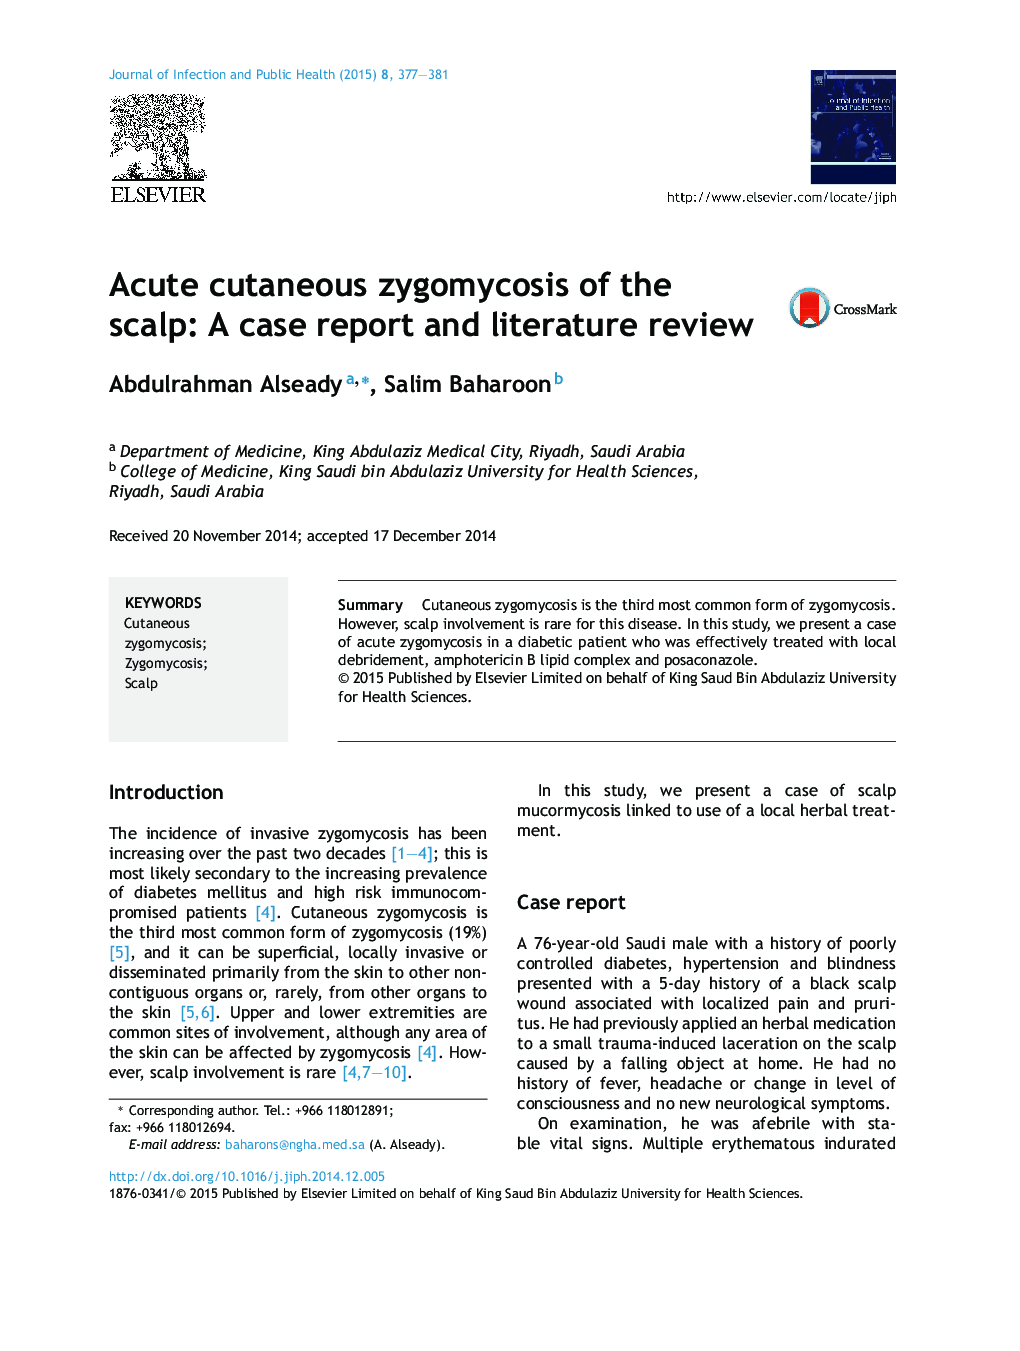 Acute cutaneous zygomycosis of the scalp: A case report and literature review